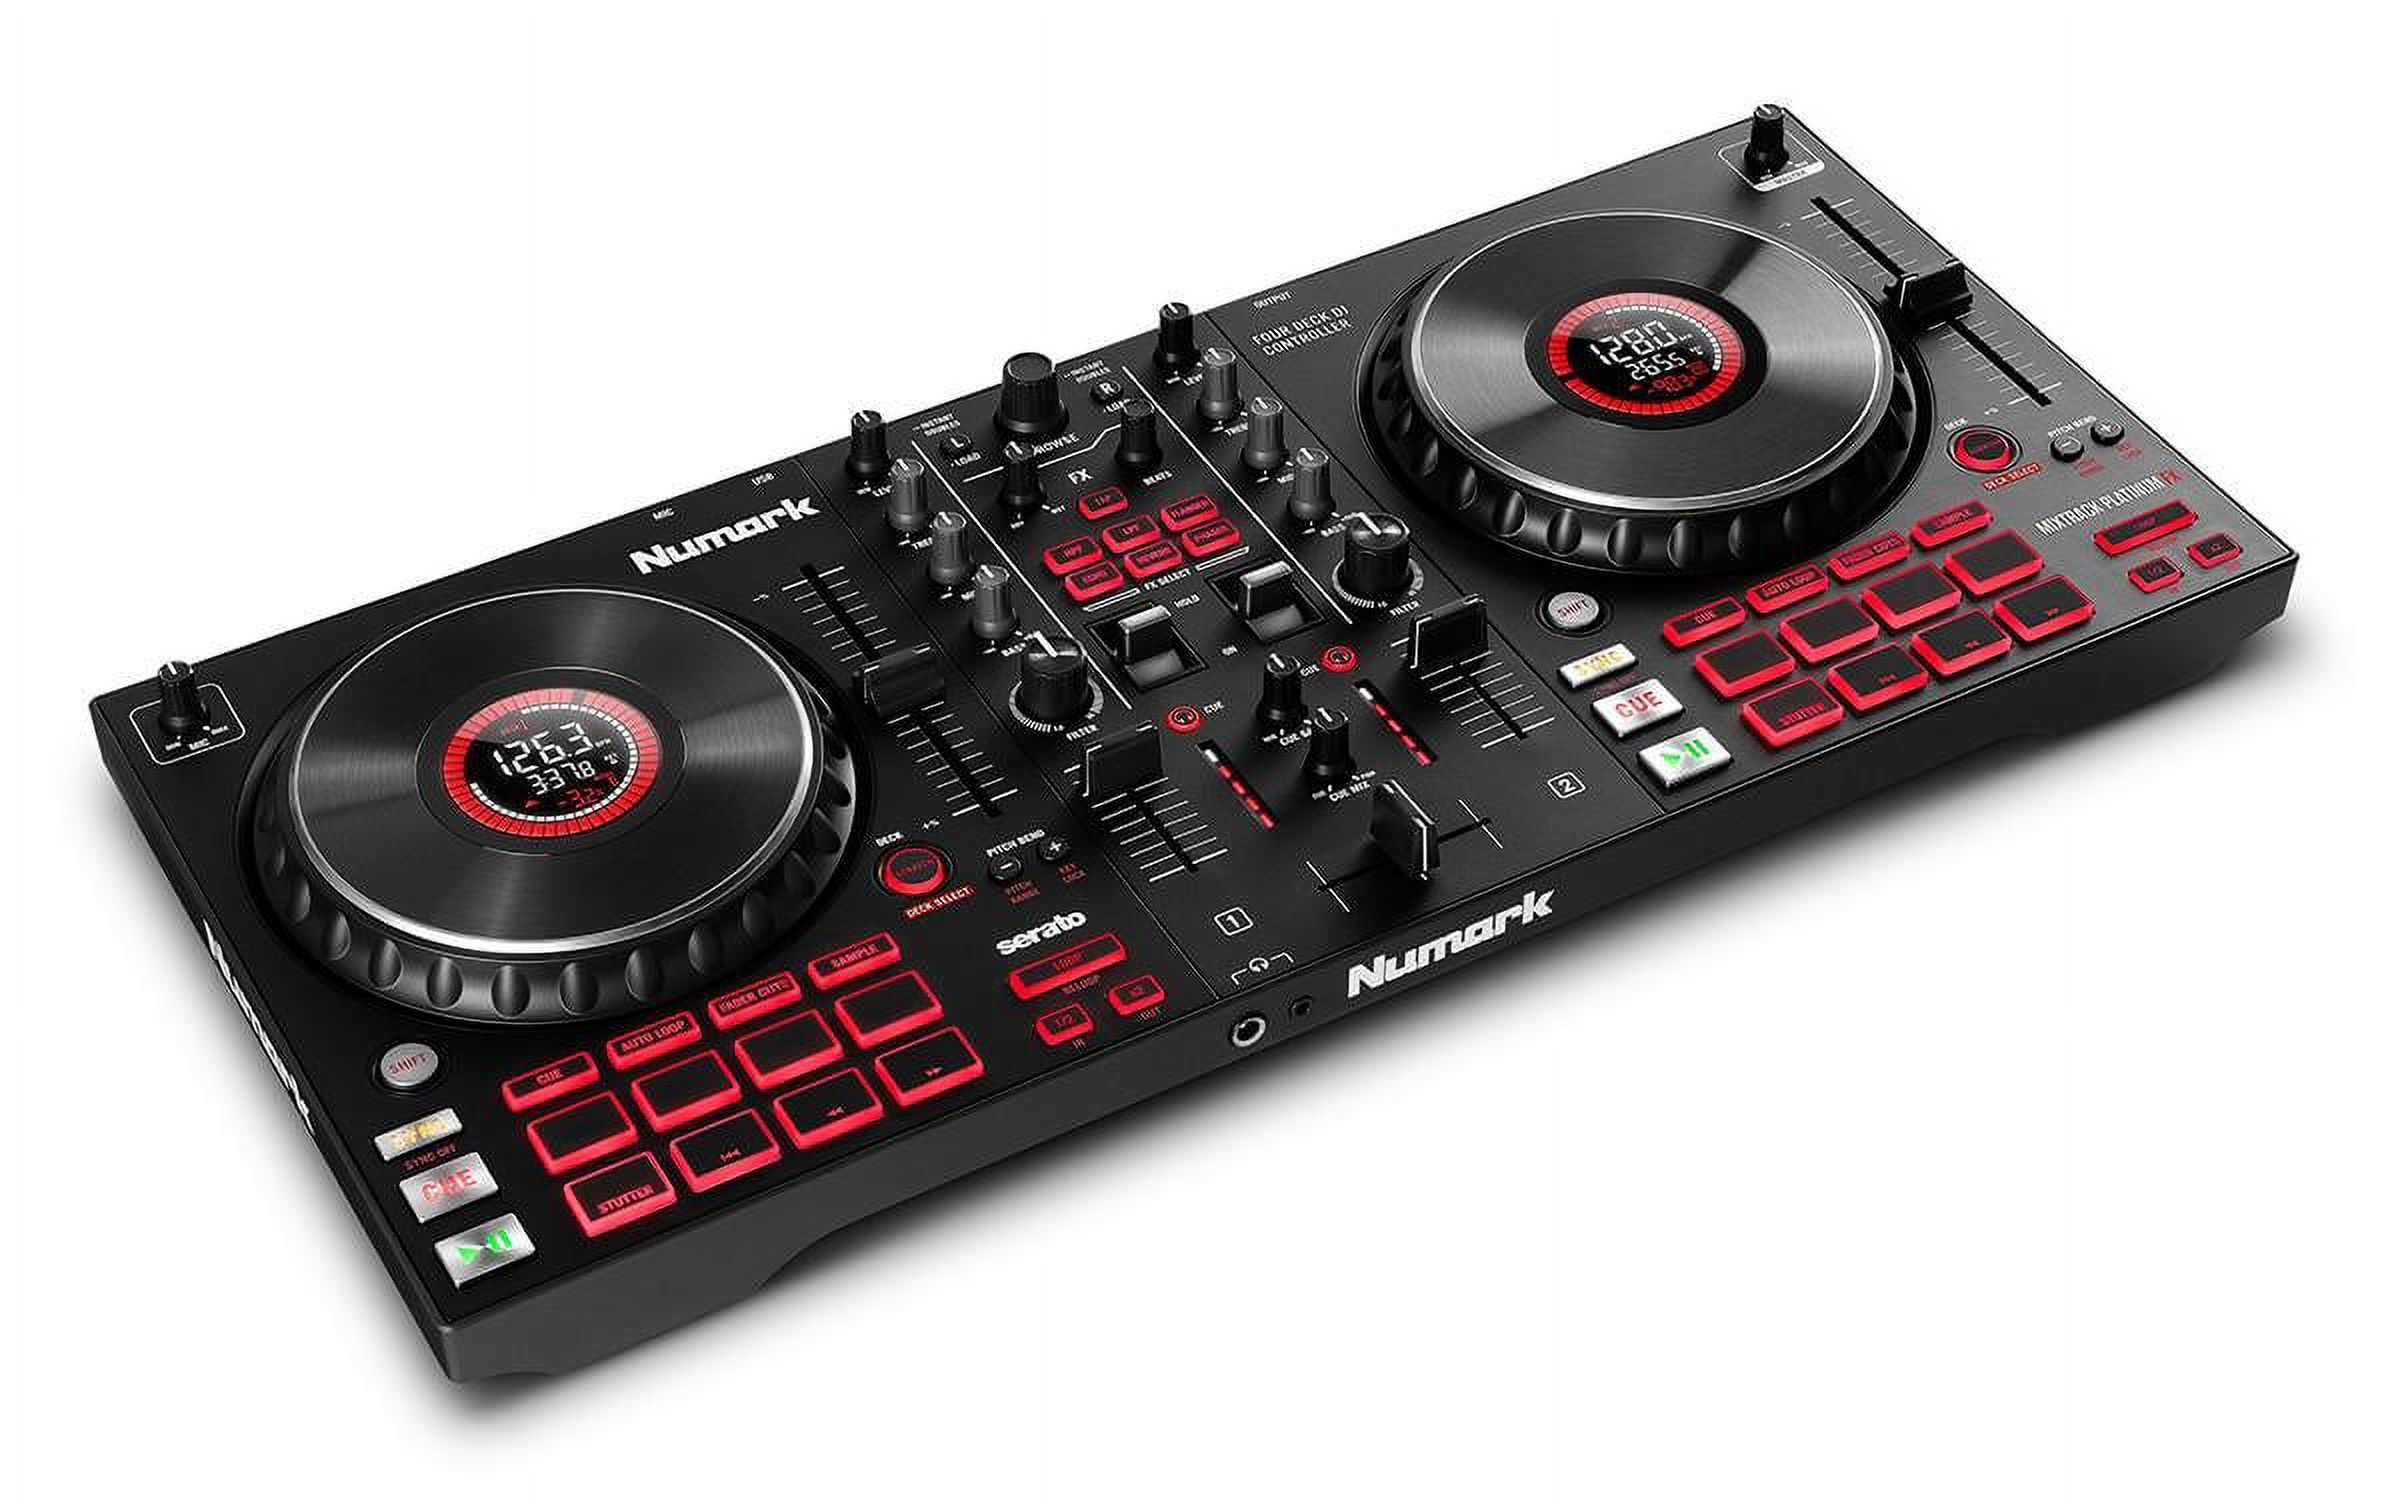 Numark Mixtrack Platinum FX - DJ Controller for Serato with 4 Deck Control, Mixer, Built-in Audio Interface, Jog Wheel Displays and Paddles - image 5 of 7